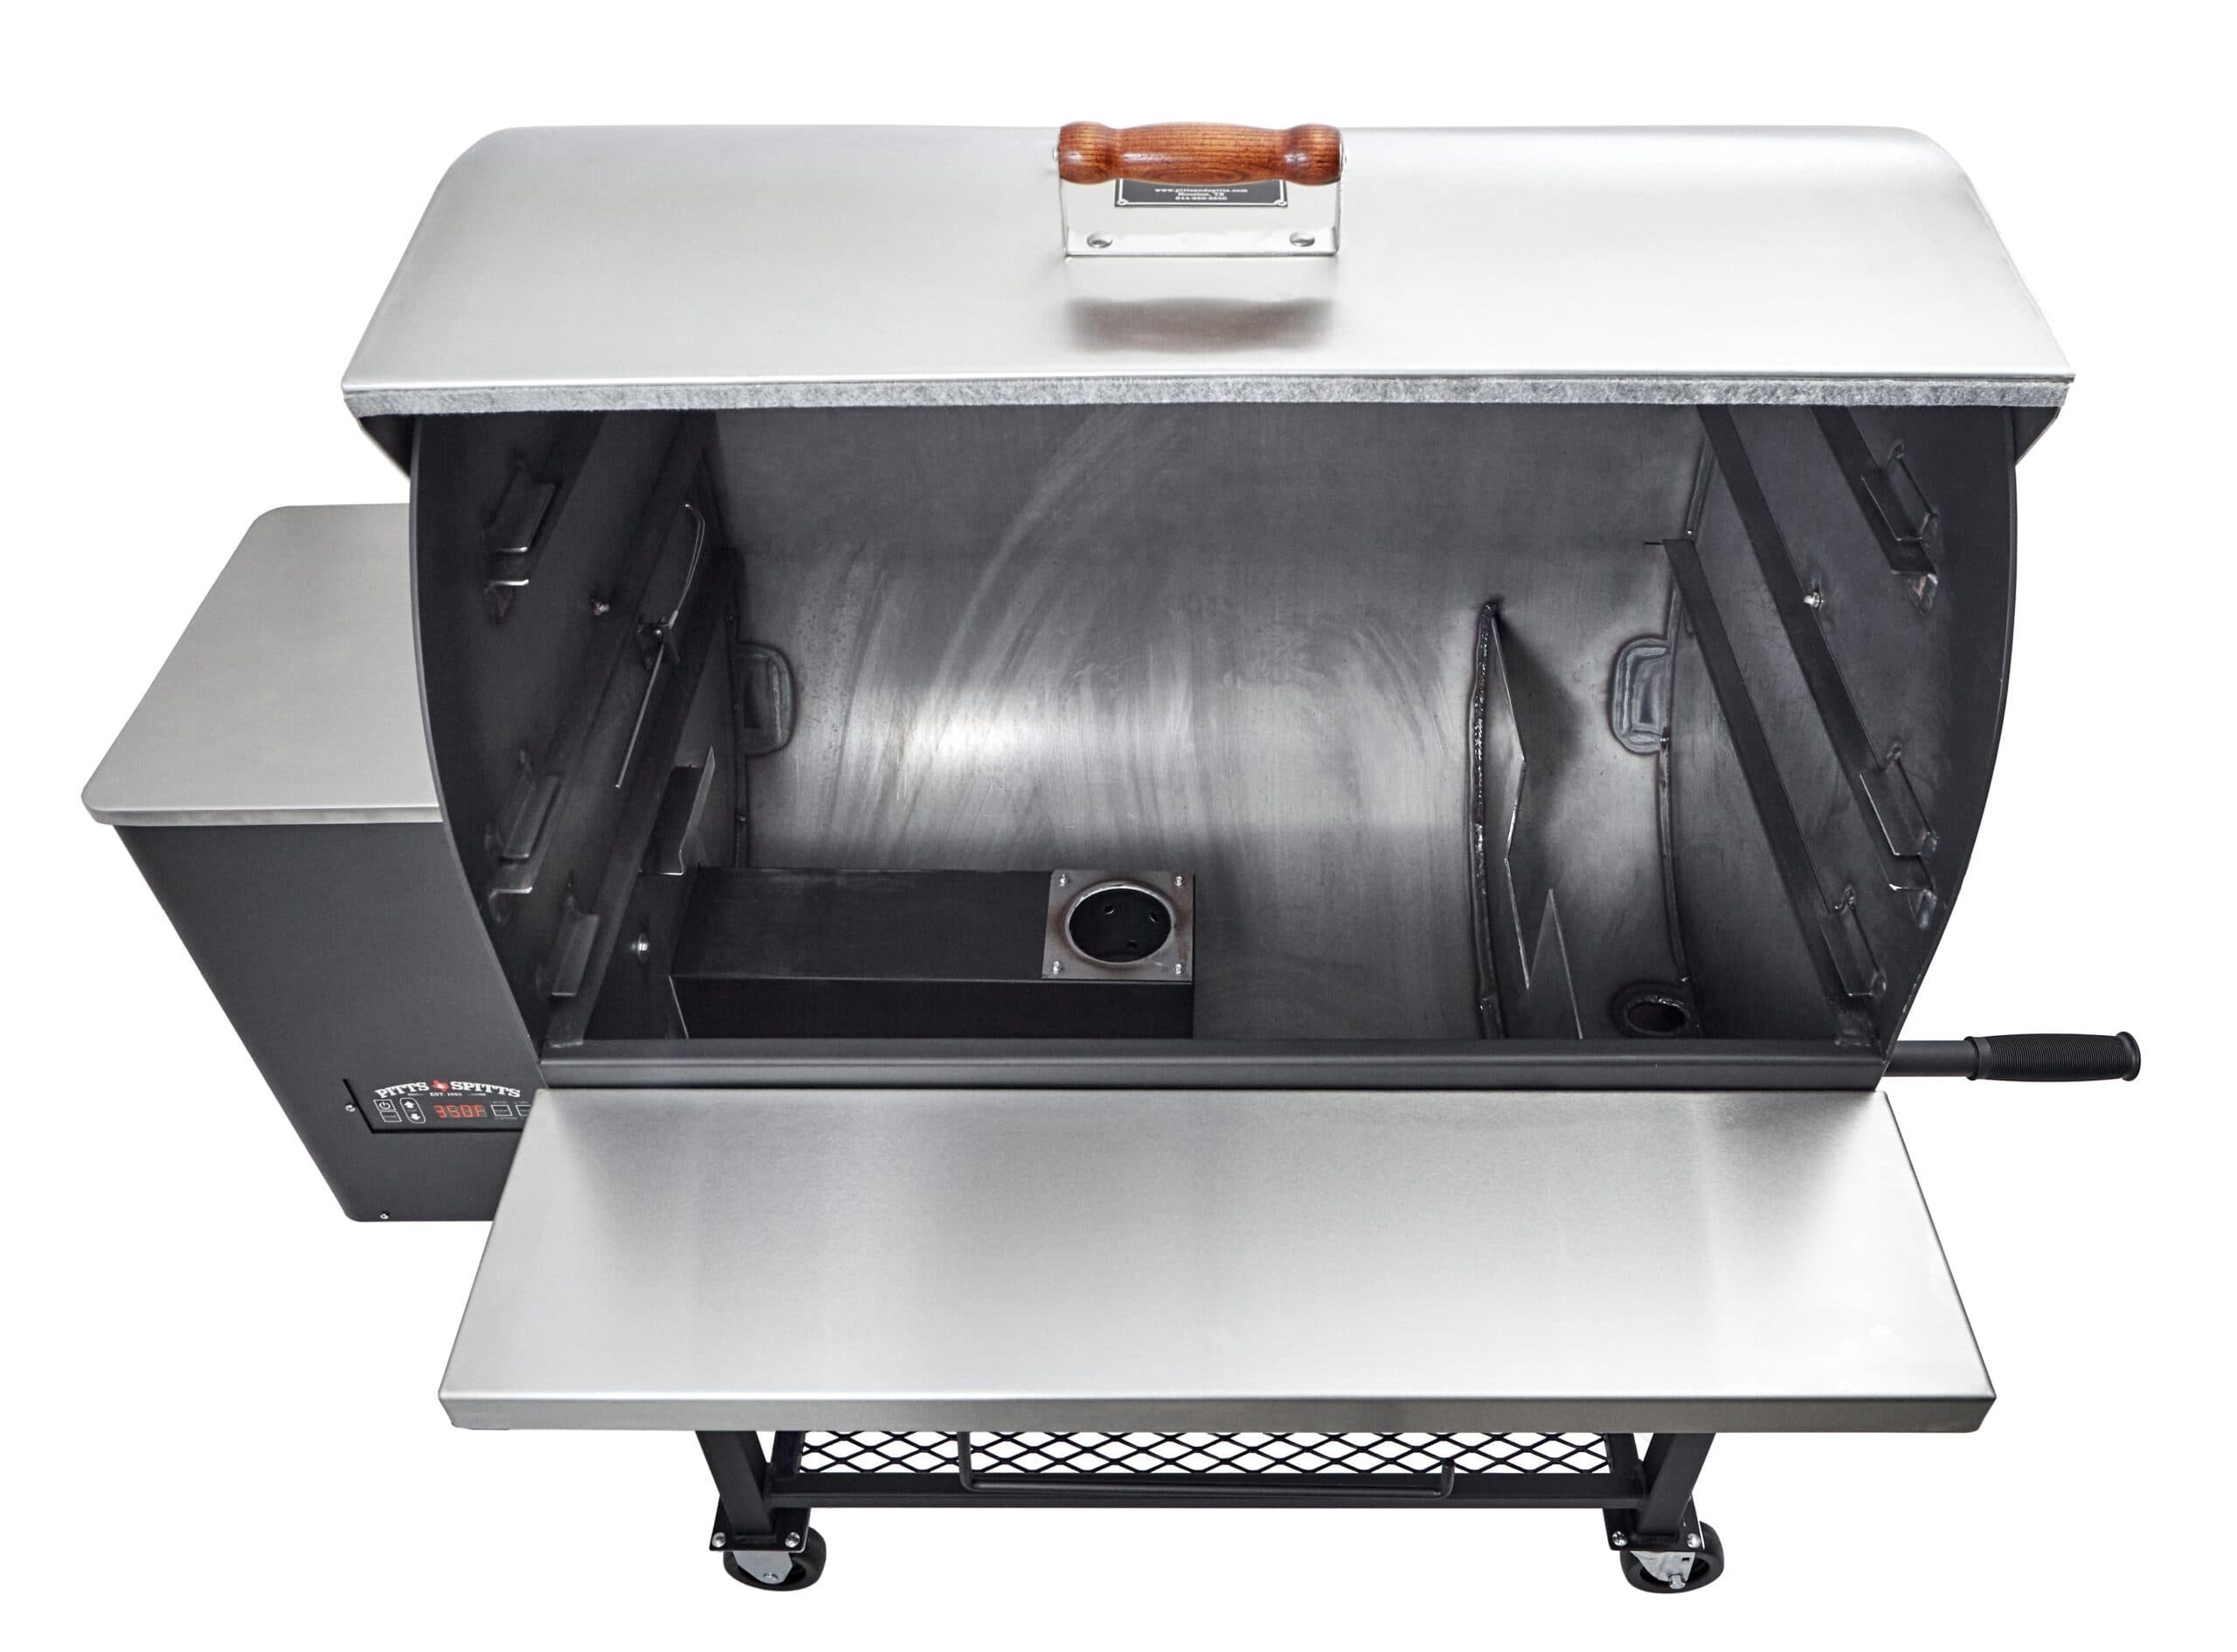 Pitts and Spitts Maverick 2000 Pellet Grill